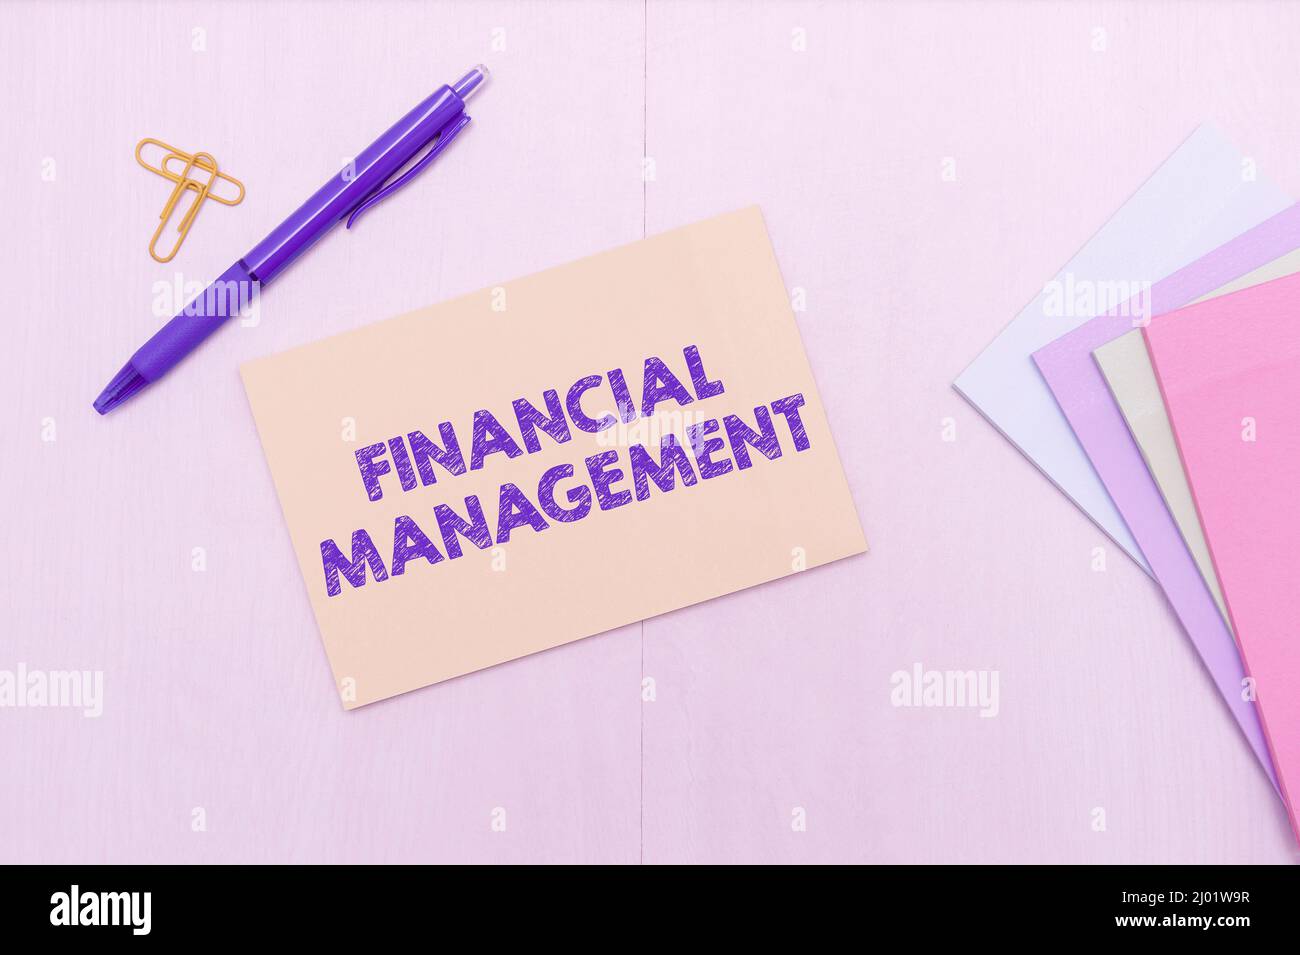 Writing displaying text Financial Management. Business idea efficient and effective way to Manage Money and Funds Flashy School Office Supplies Stock Photo